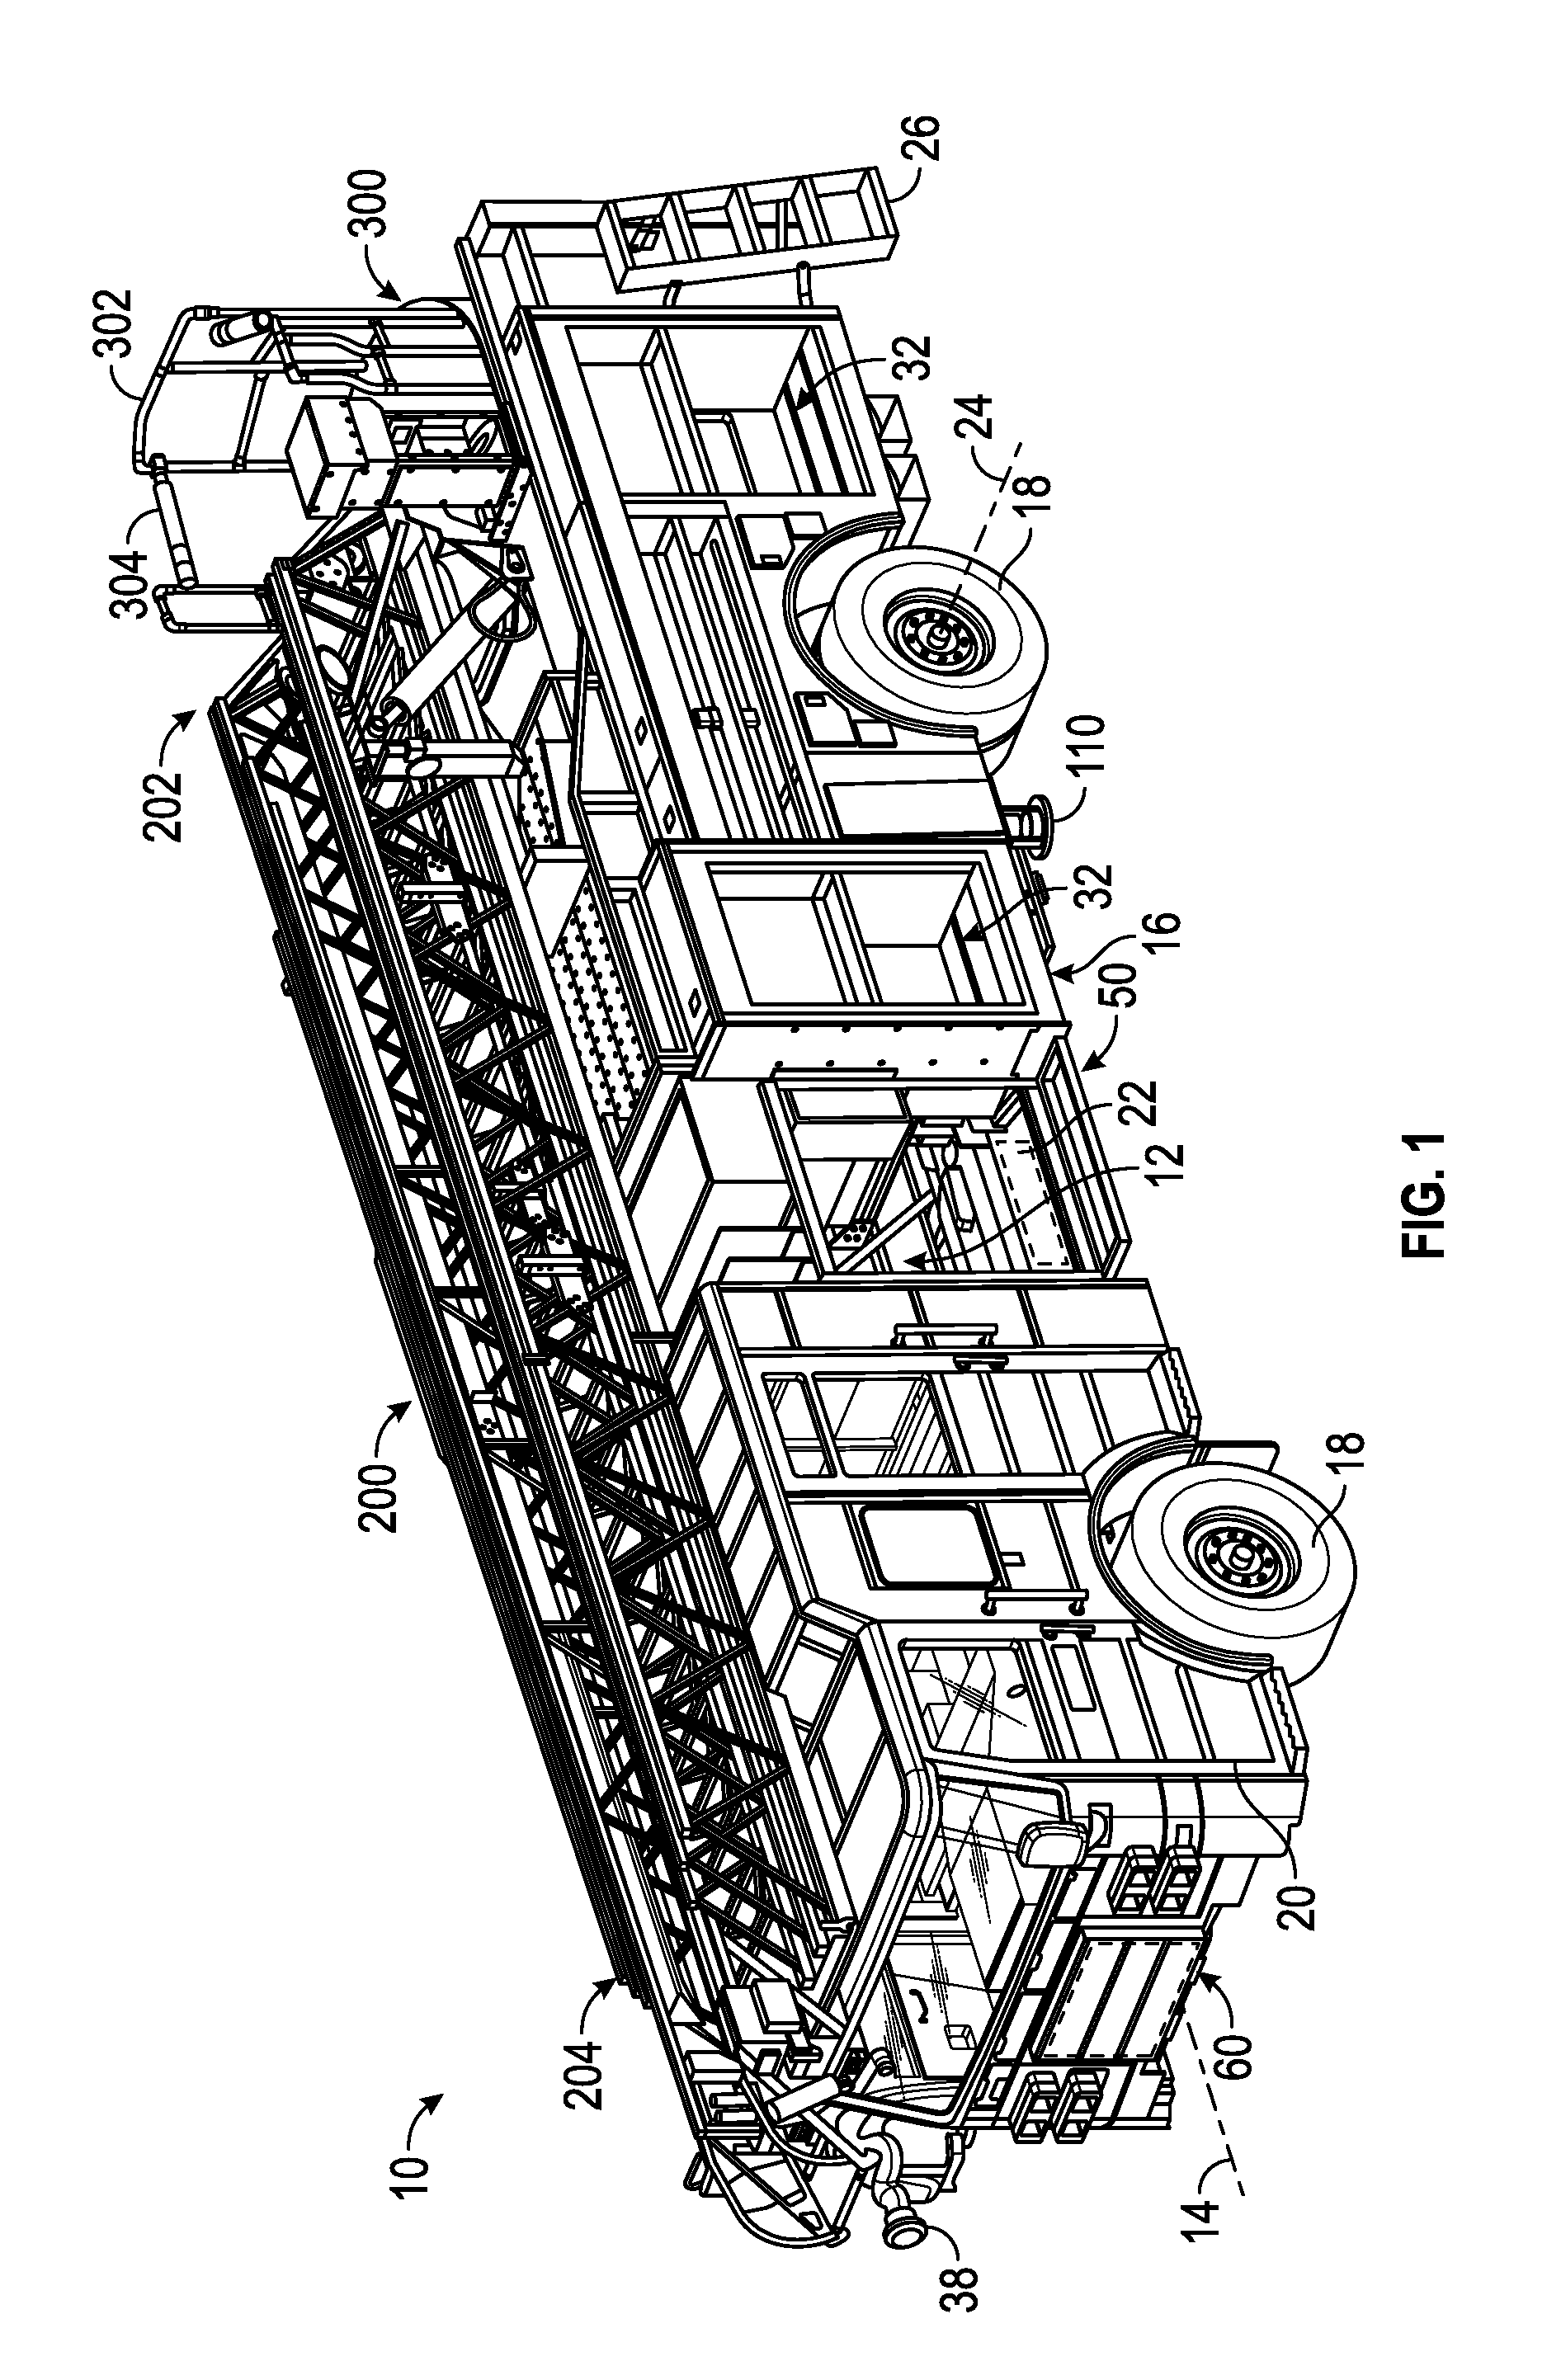 Pedestal and torque box assembly for a fire apparatus